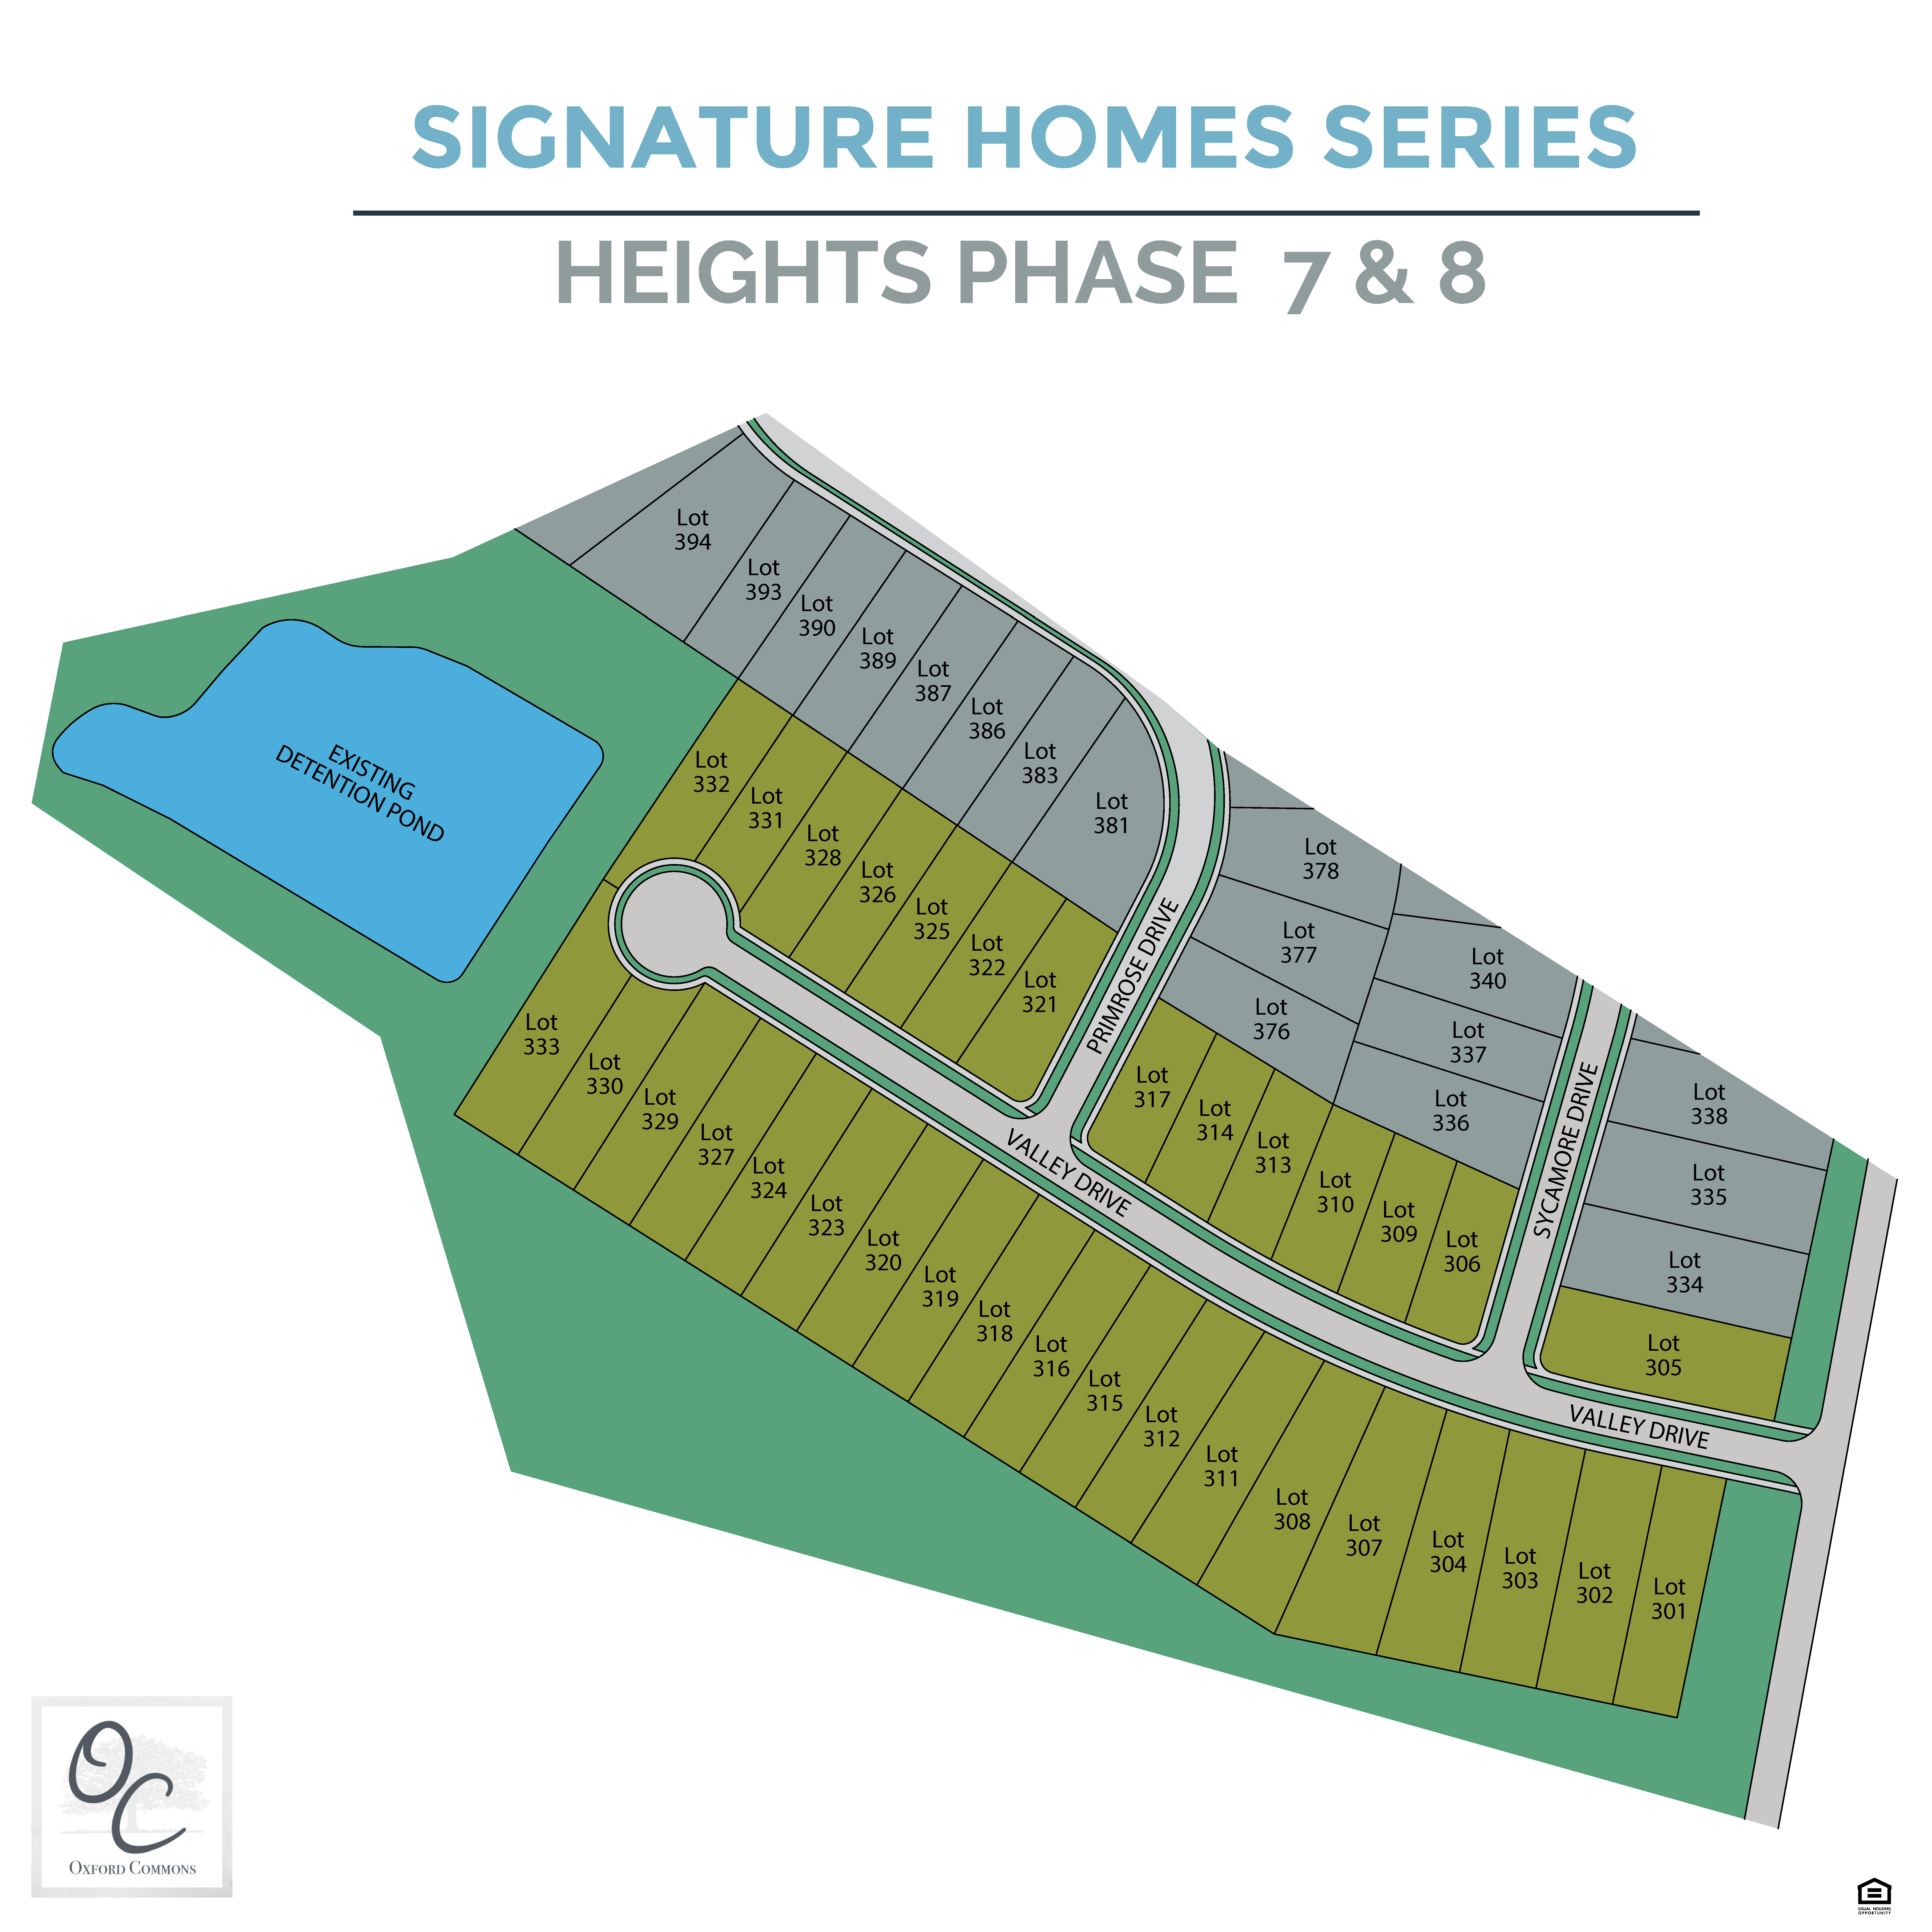 Oxford Commons - Signature Homes Map